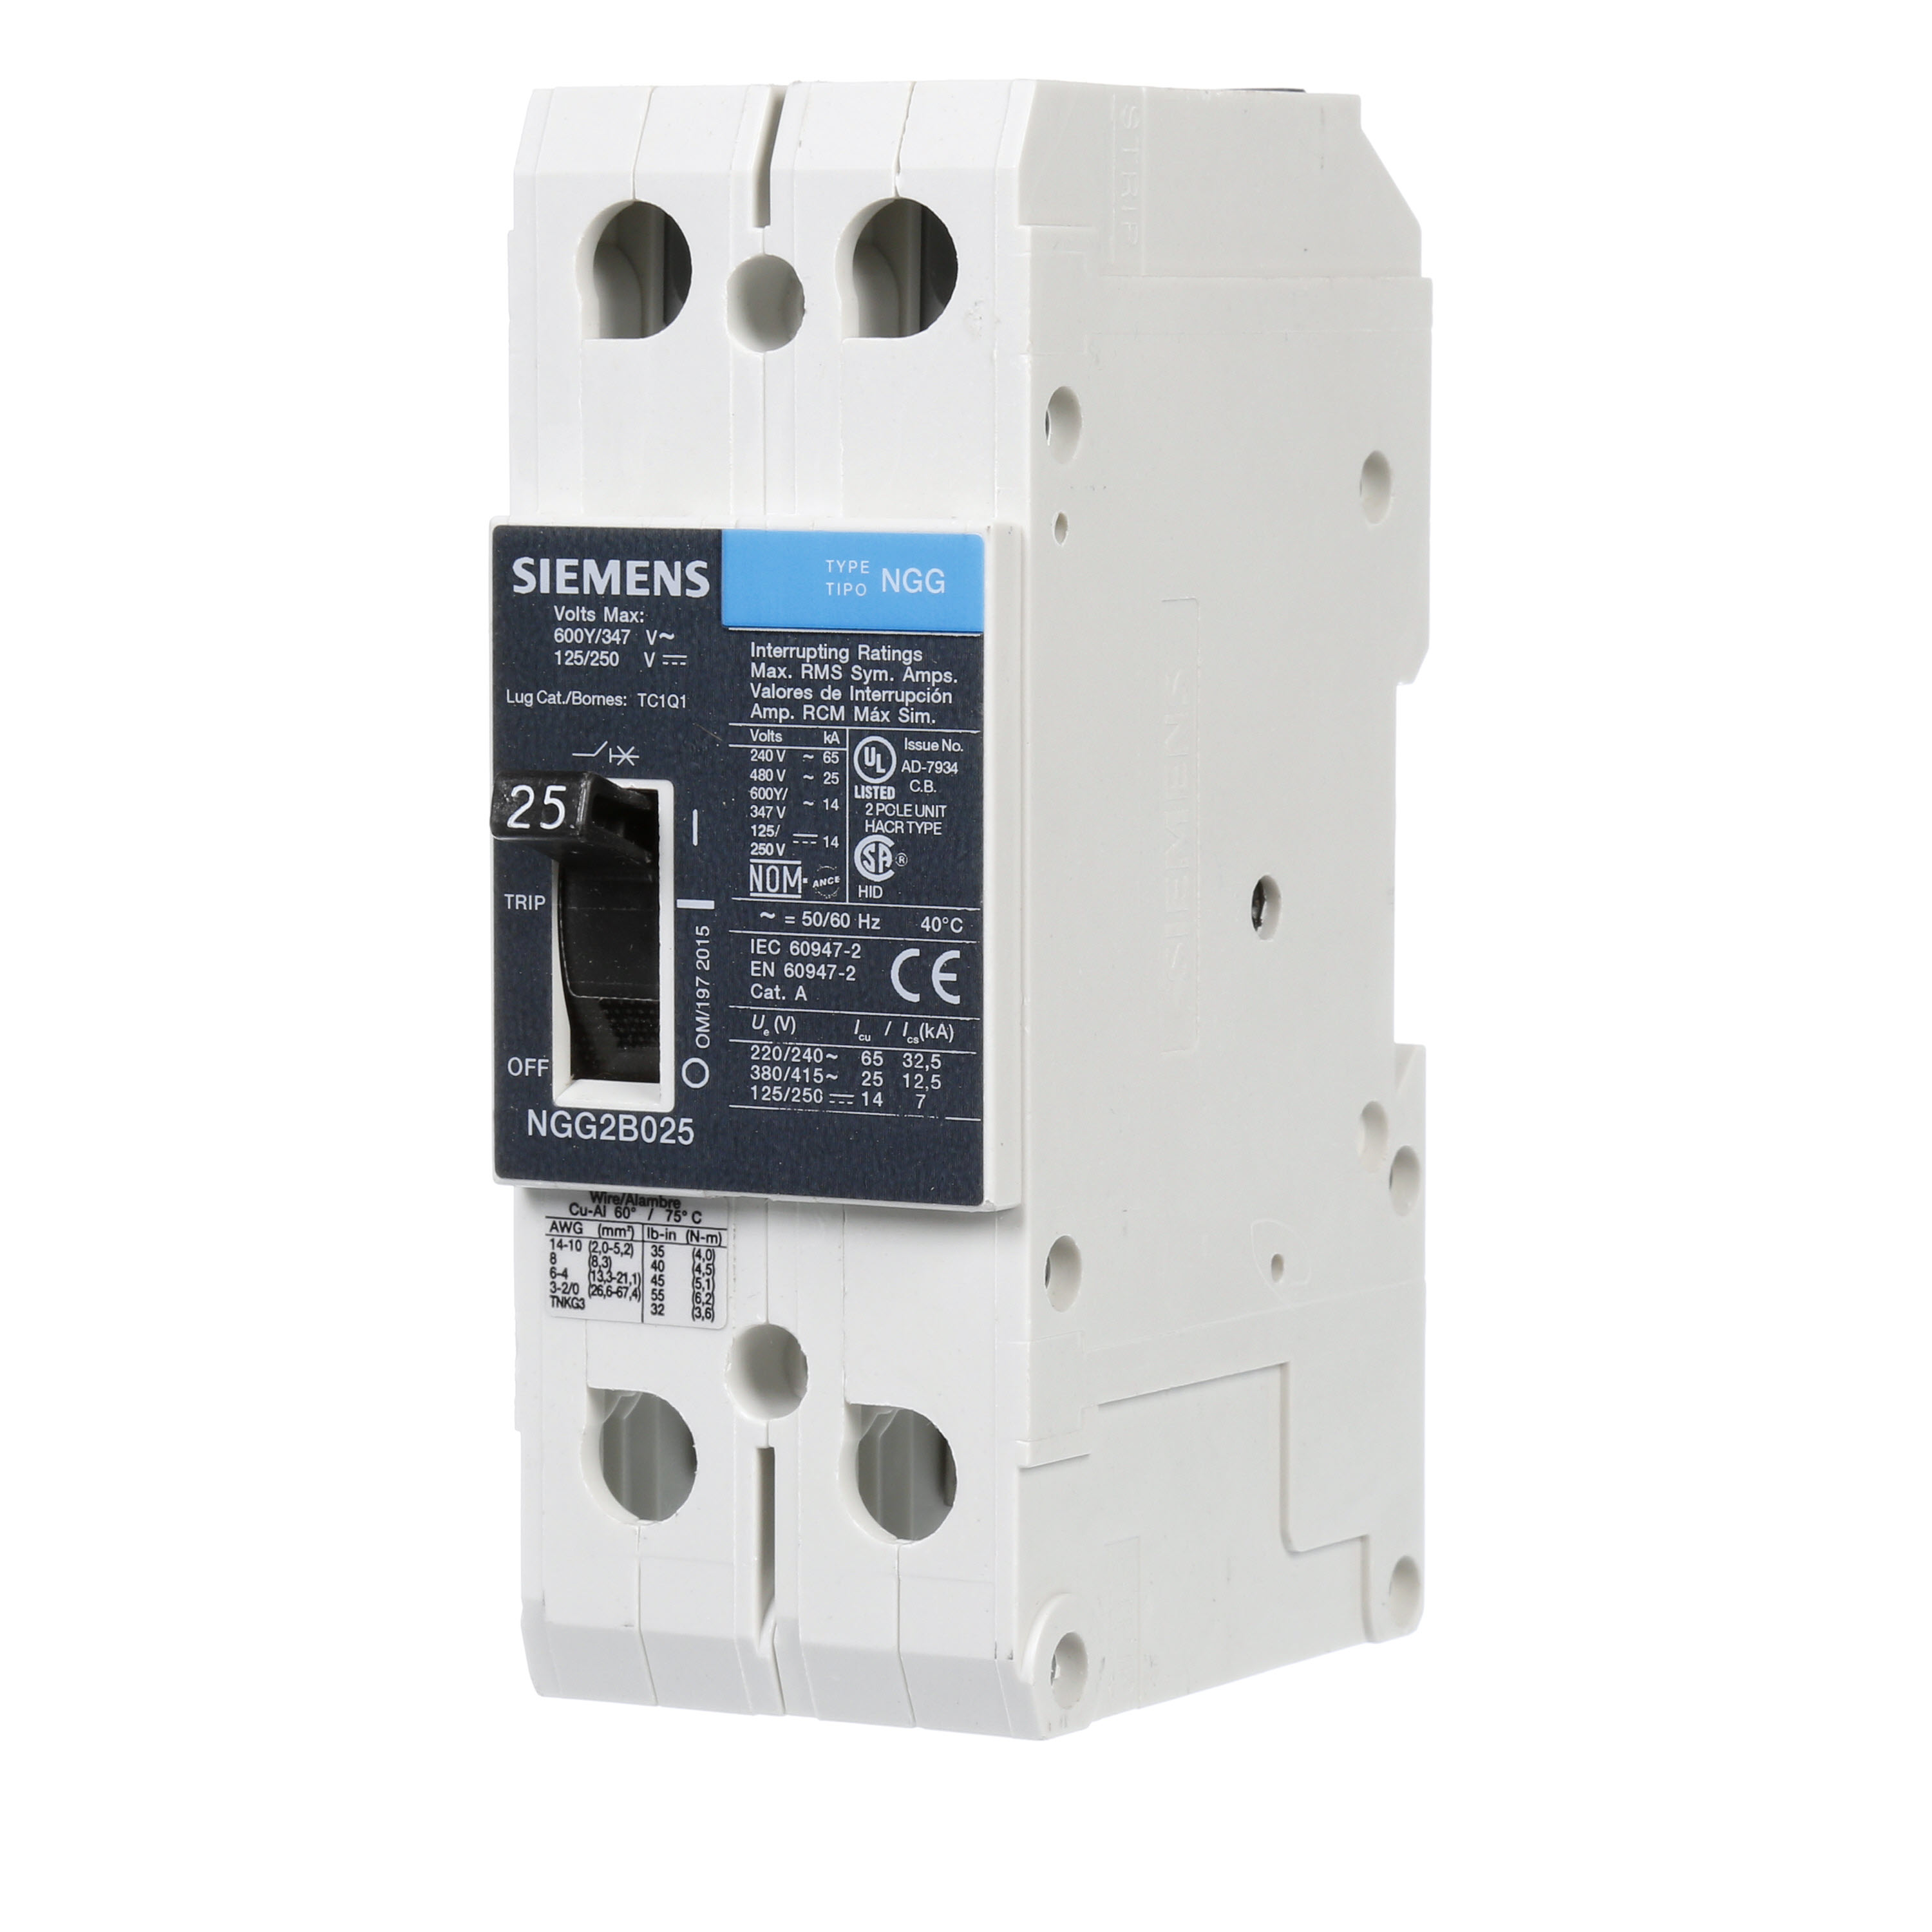 SIEMENS LOW VOLTAGE G FRAME CIRCUIT BREAKER WITH THERMAL - MAGNETIC TRIP. UL LISTED NGG FRAME WITH STANDARD BREAKING CAPACITY. 25A 2-POLE (14KAIC AT 600Y/347V)(25KAIC AT 480V). SPECIAL FEATURES MOUNTS ON DIN RAIL / SCREW, LINE AND LOAD SIDE LUGS (TC1Q1) WIRE RANGE 14 - 10 AWS (CU/AL). DIMENSIONS (W x H x D) IN 2 x 5.4 x 2.8.